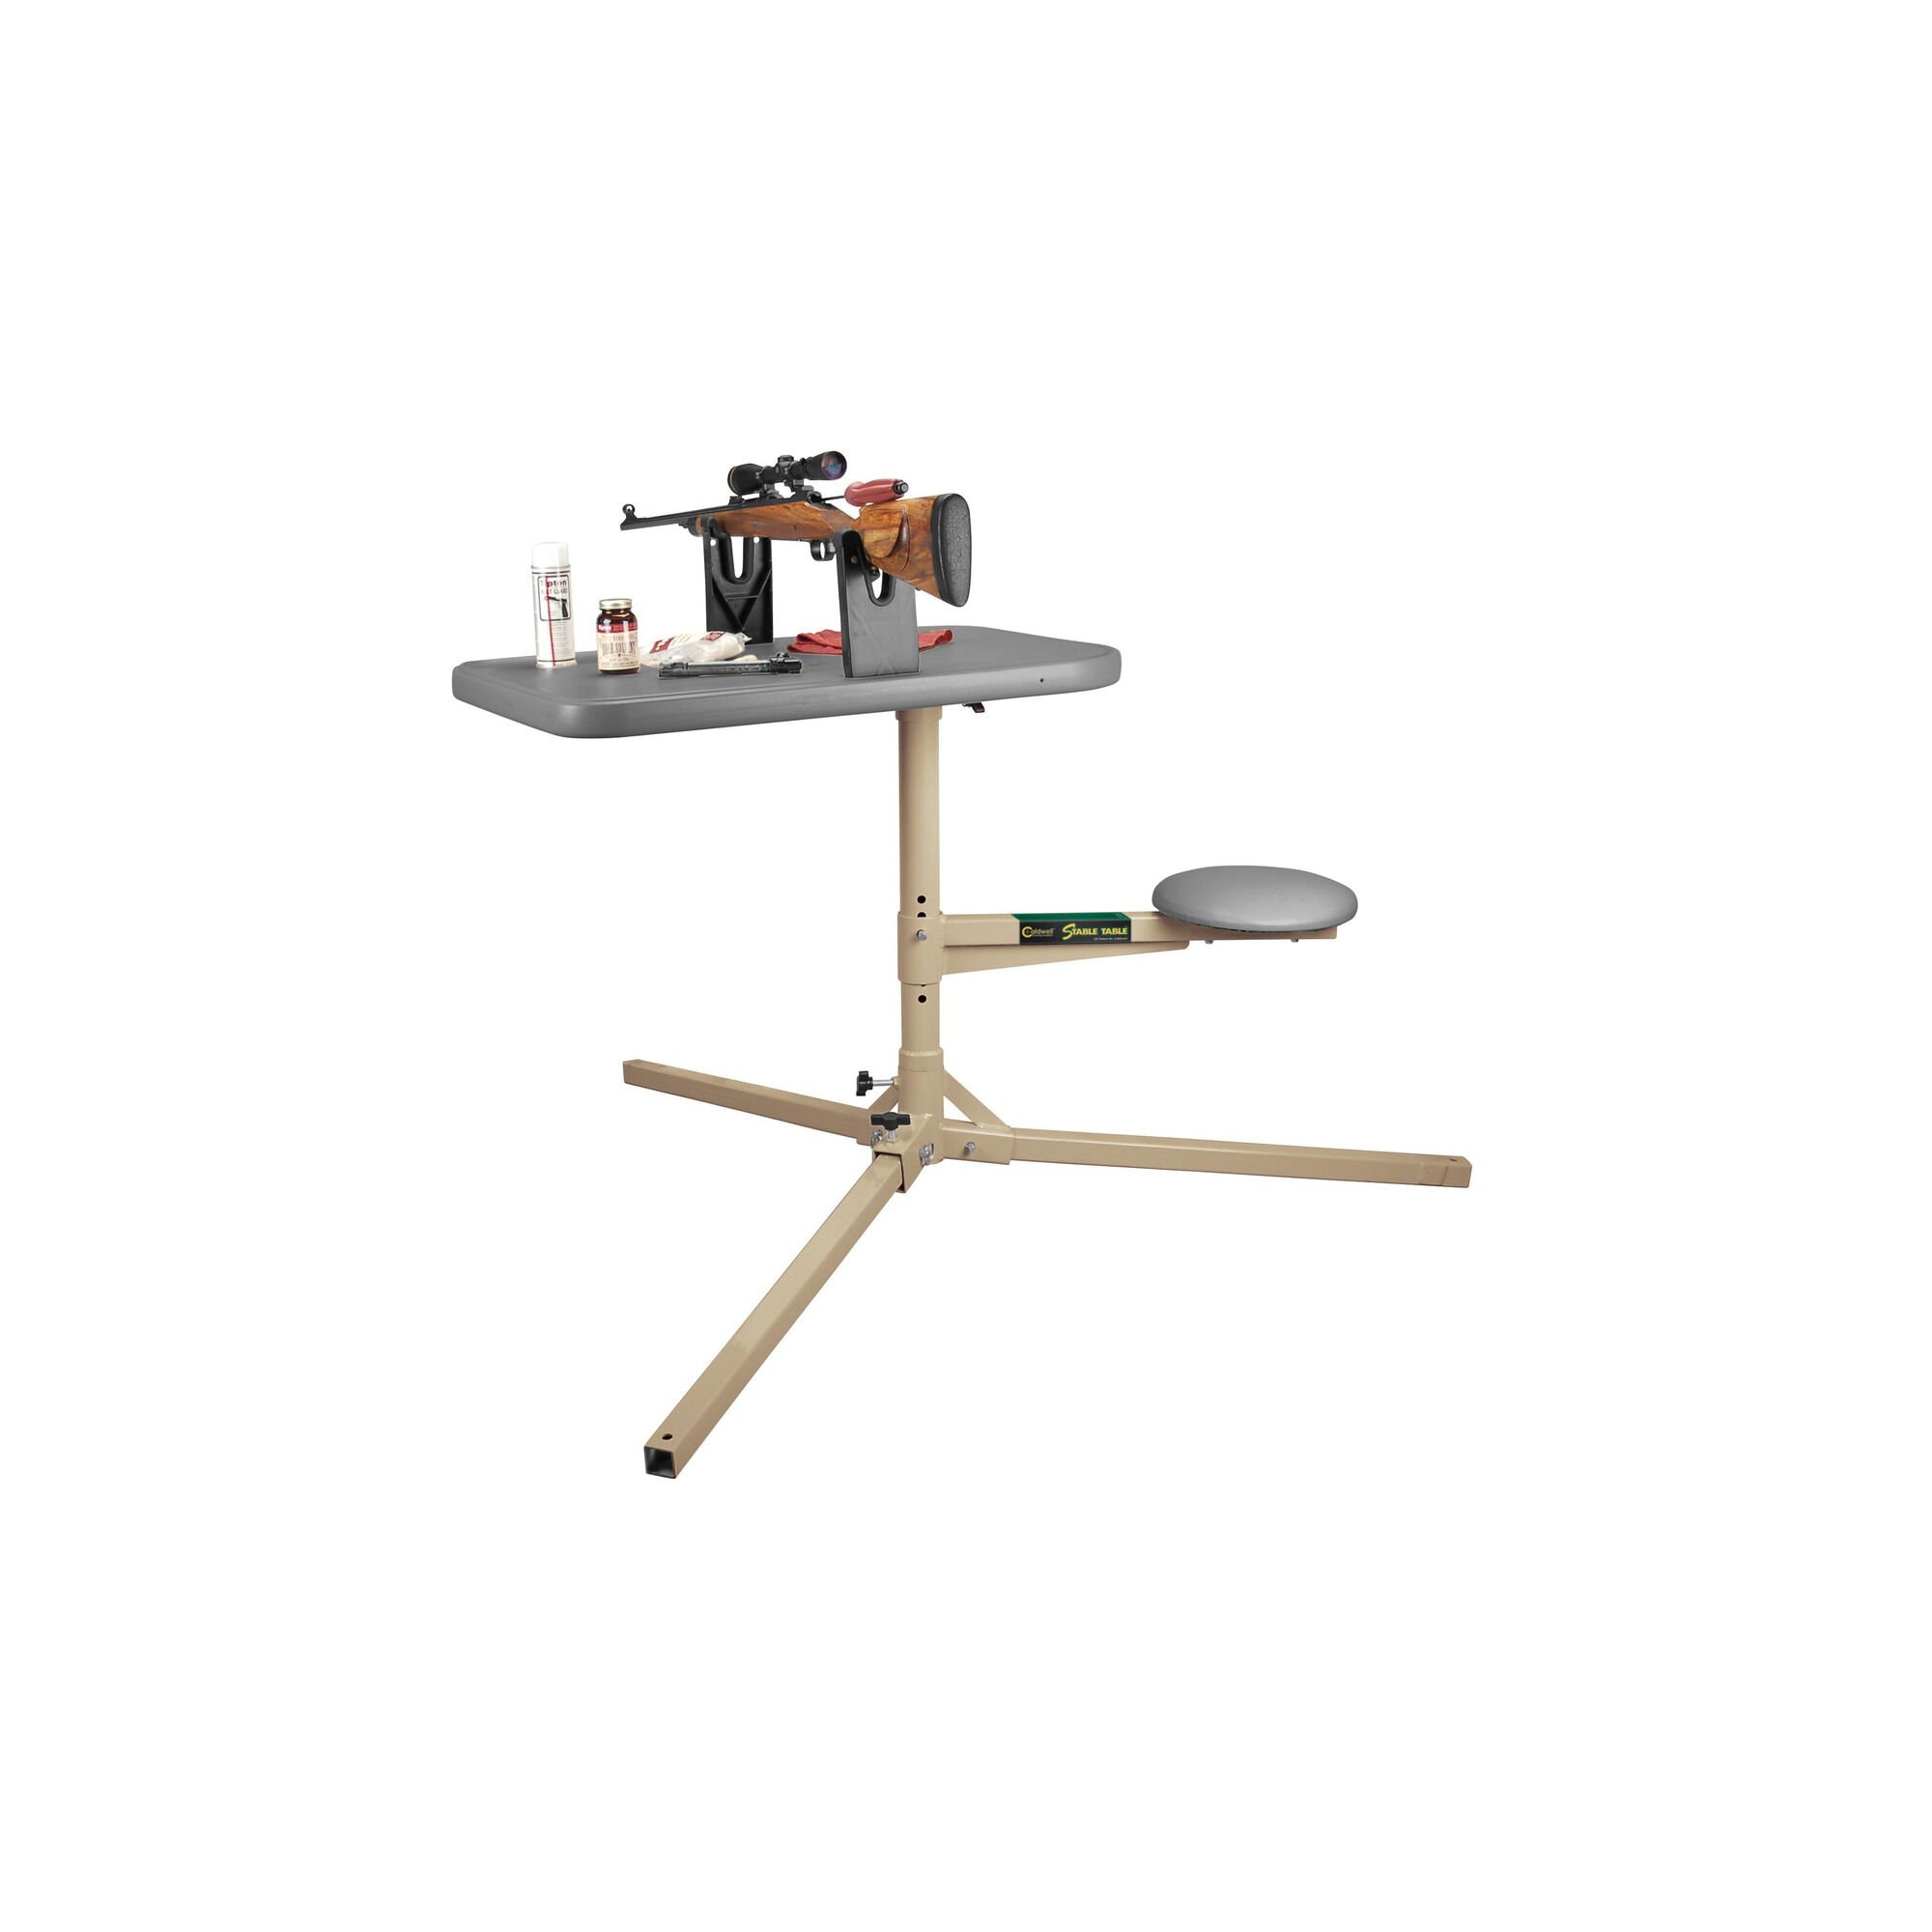 Gray Caldwell Stable Table Lite Shooting Table Bench Rest for Outdoor Range 